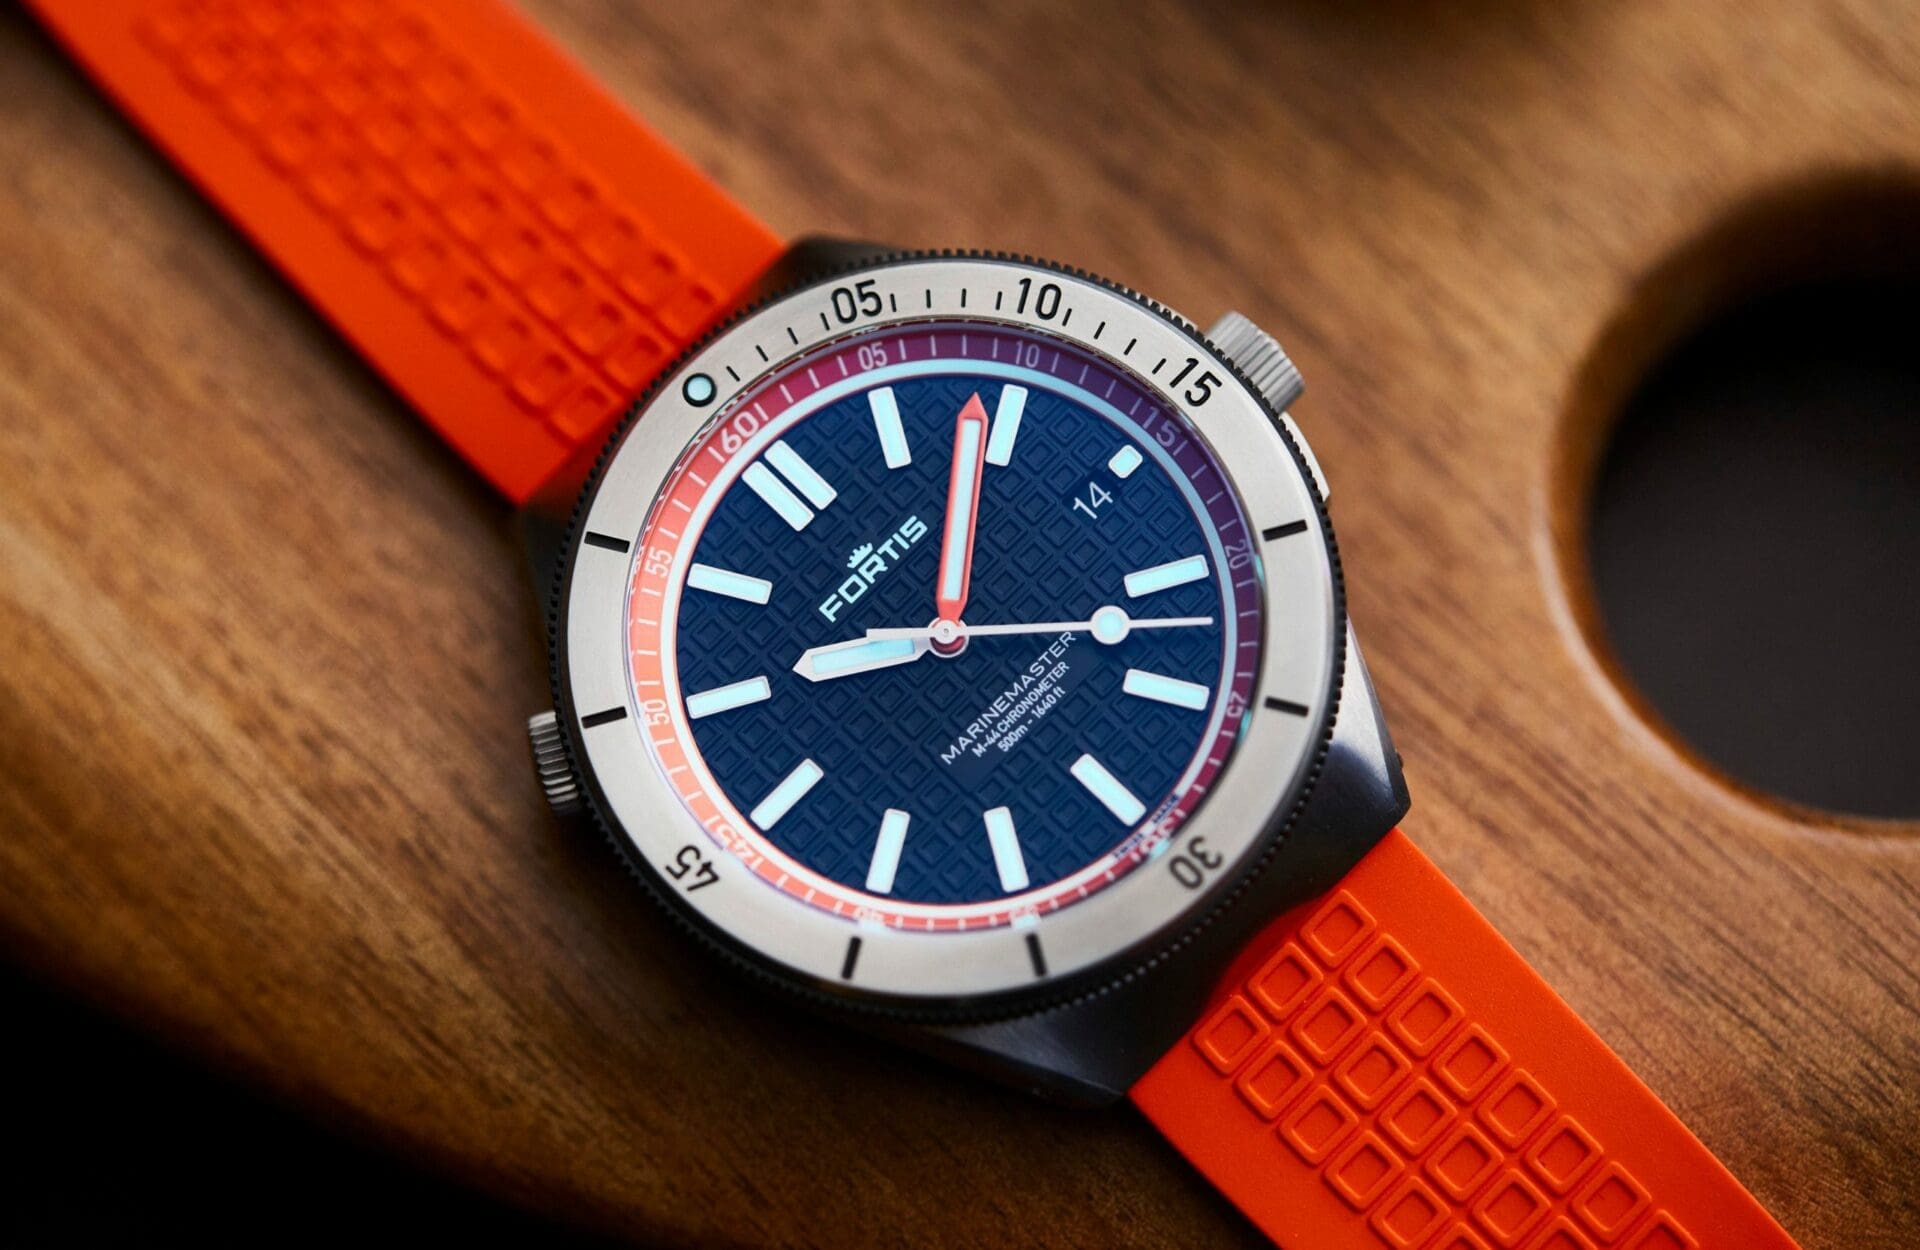 HANDS-ON: The Fortis Marinemaster M-44 has no business being this underrated